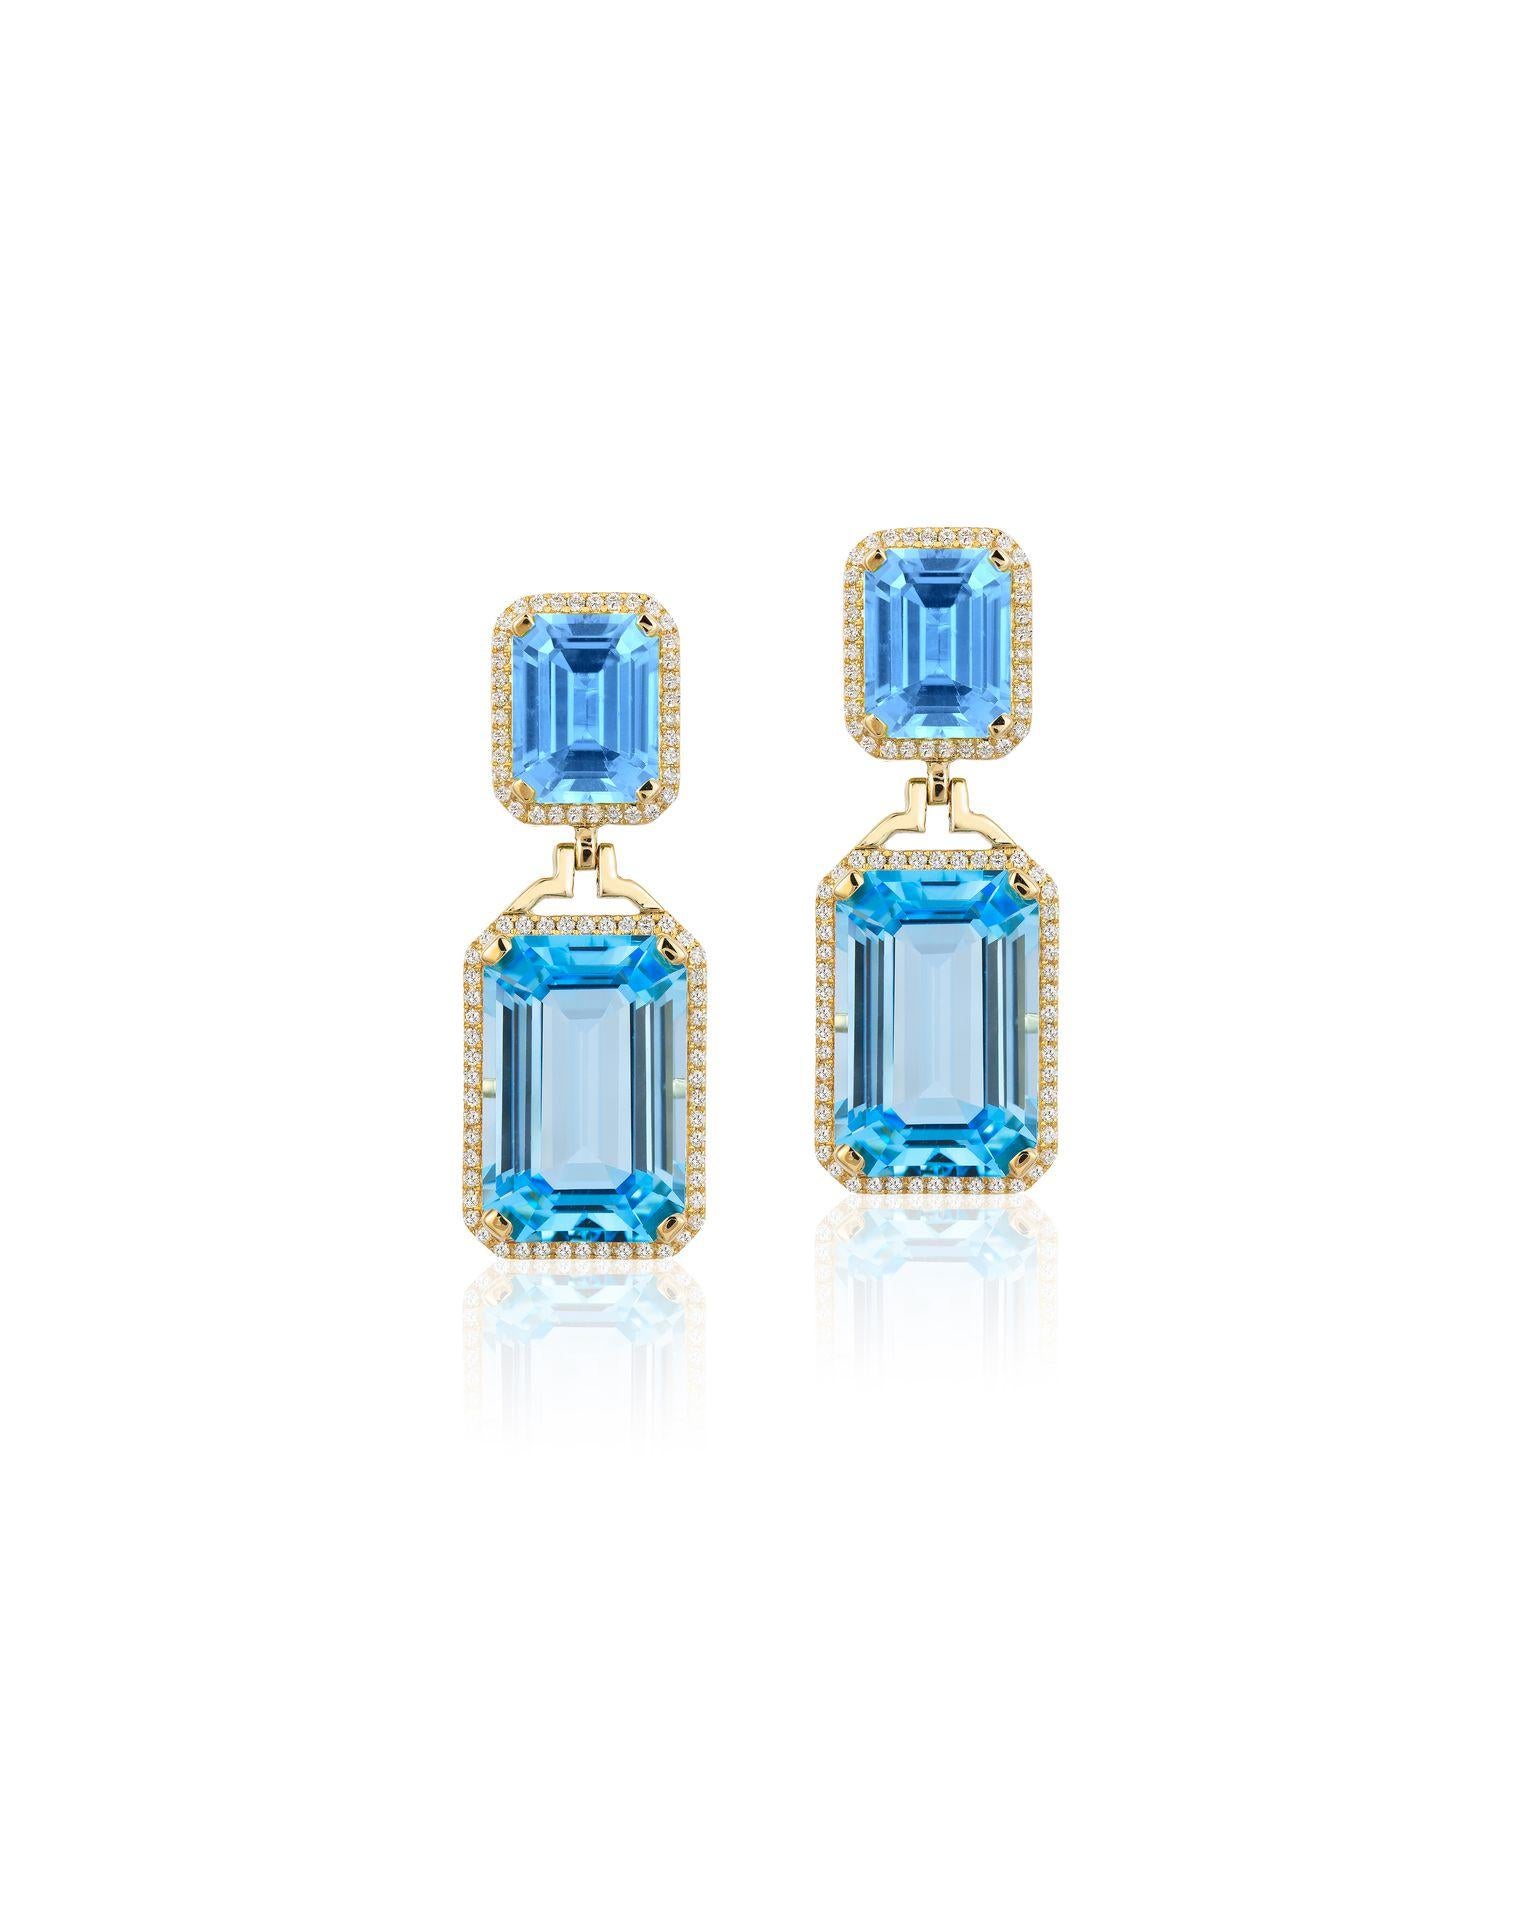 Blue Topaz Emerald Cut Earrings in 18K Yellow Gold with Diamonds from ‘Gossip’ Collection
Stone Size: 15 x 10 mm & 9 X 7 mm
Gemstone Approx. Wt: Blue Topaz- 24.21 Carats
Diamonds: G-H / VS, Approx. Wt: 0.48 Carats